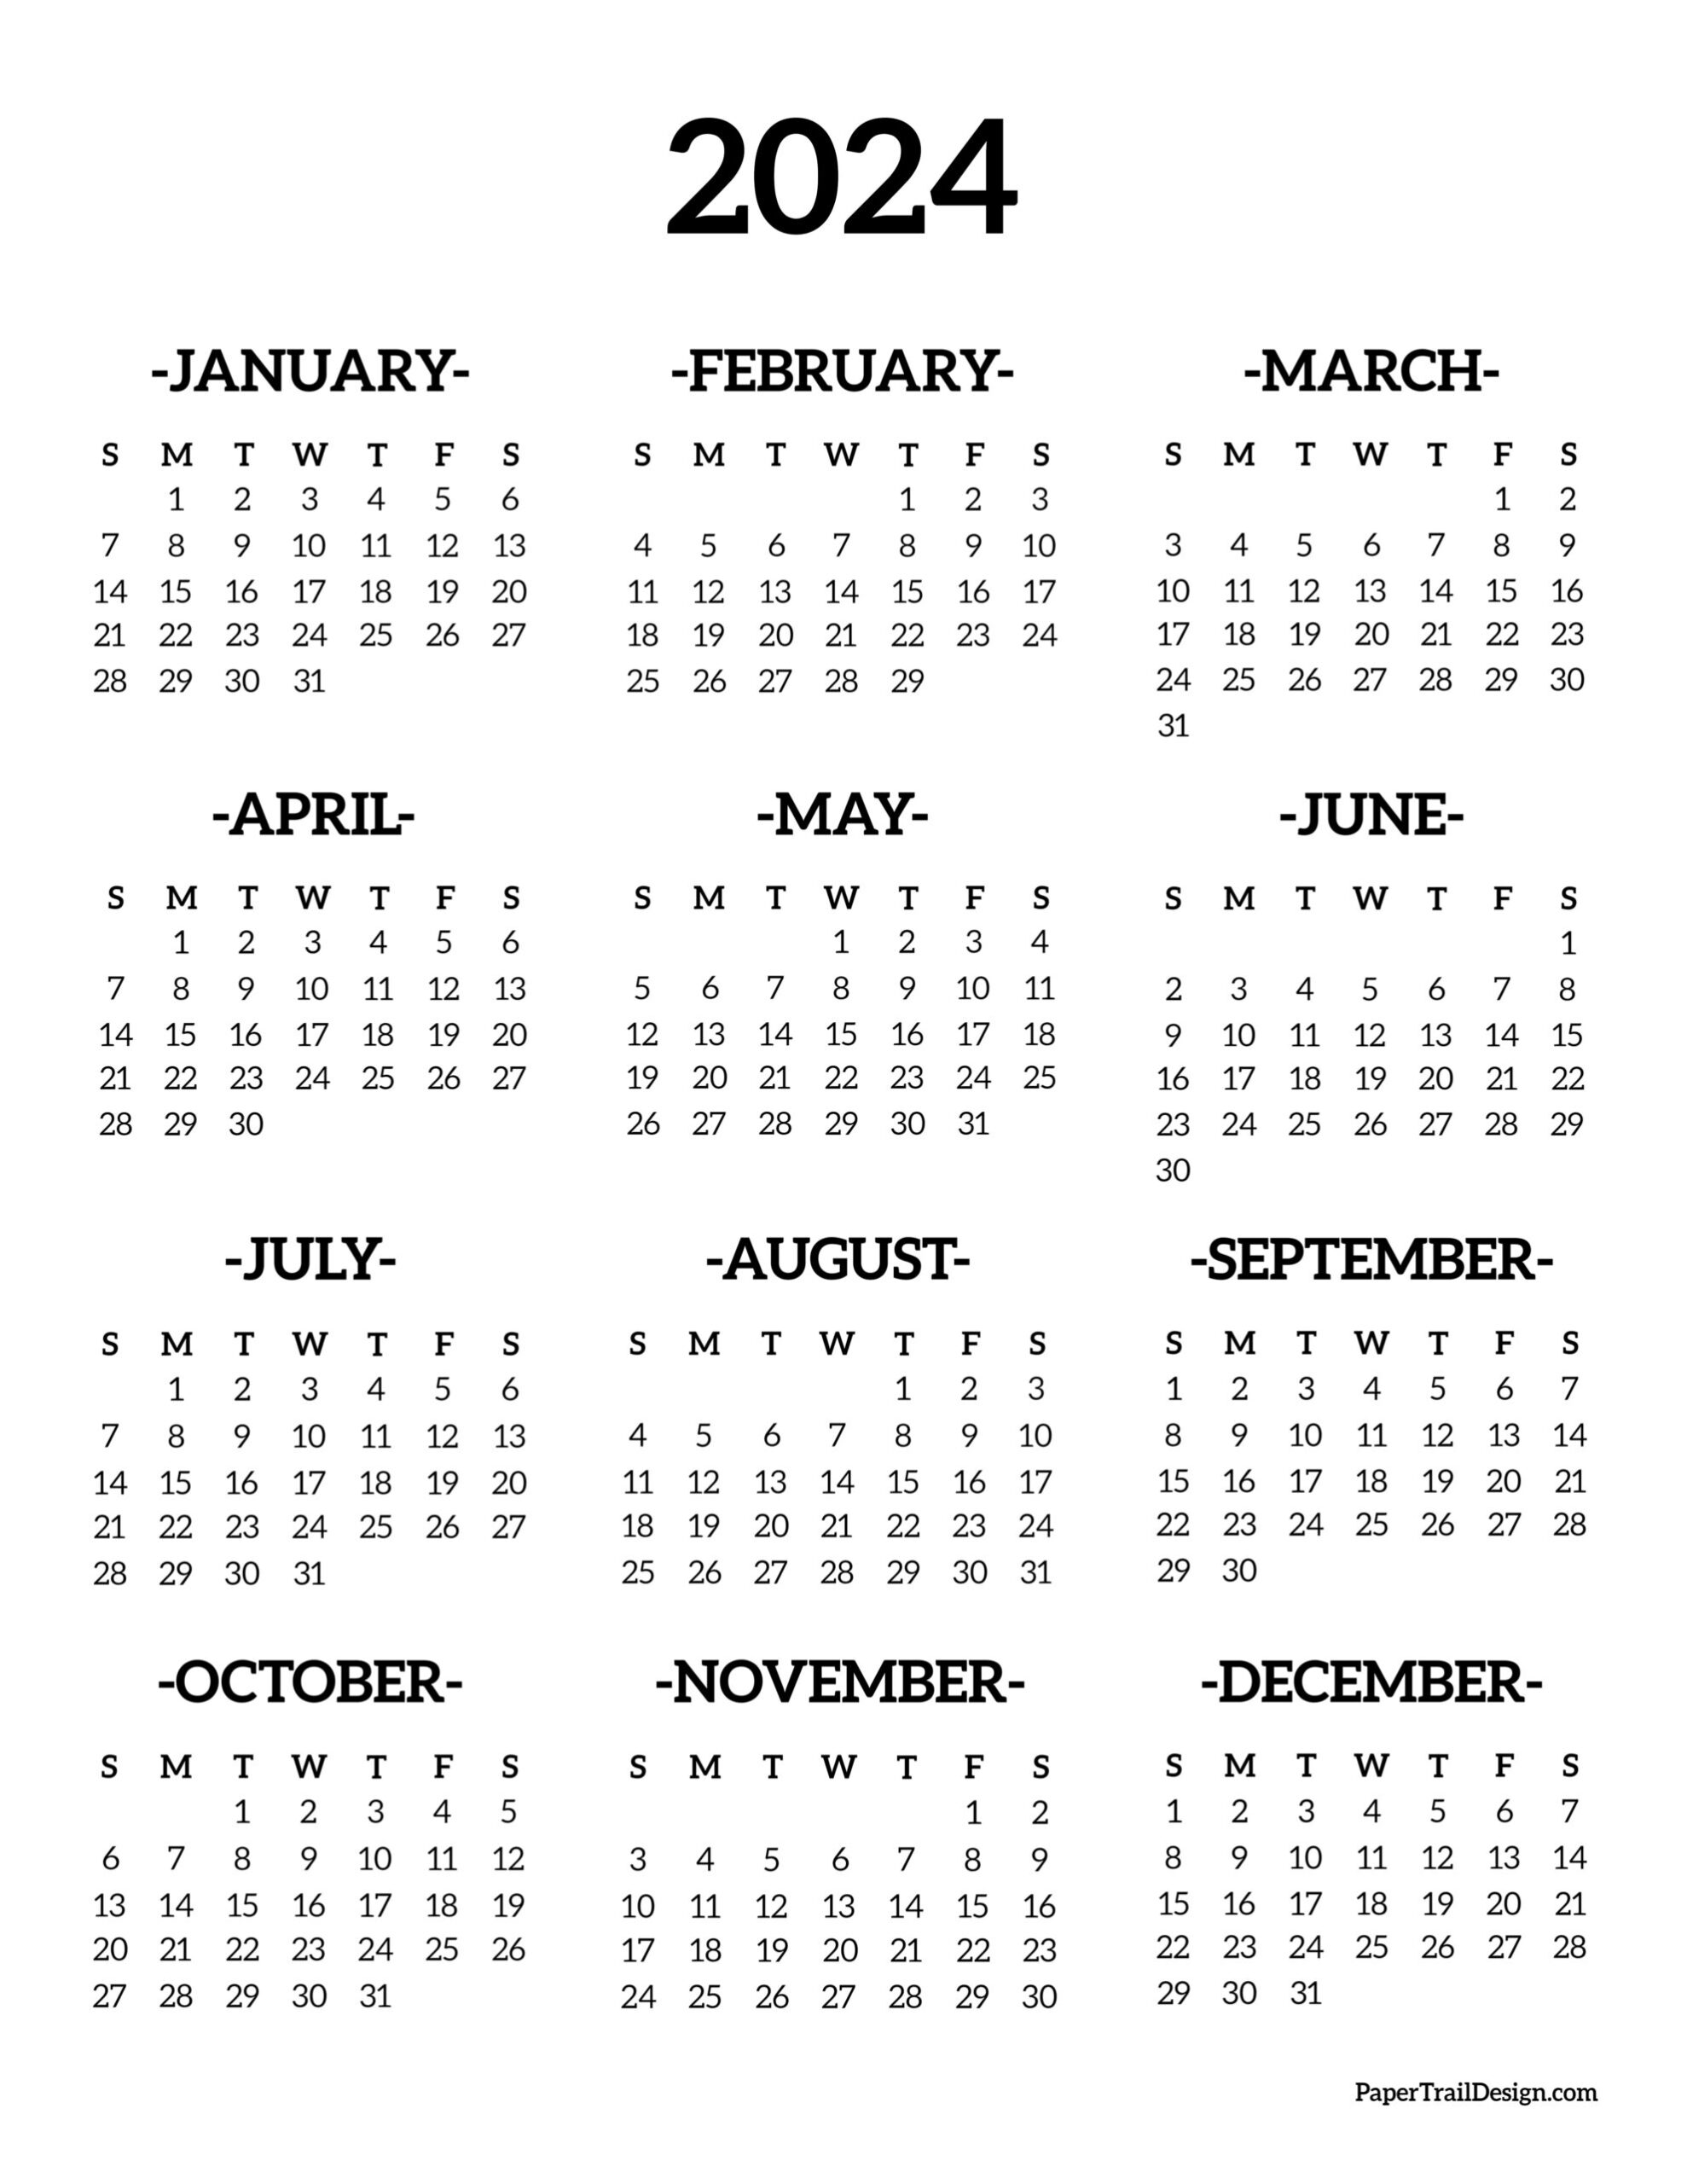 Calendar 2024 Printable One Page - Paper Trail Design for 2024 Year At A Glance Printable Calendar